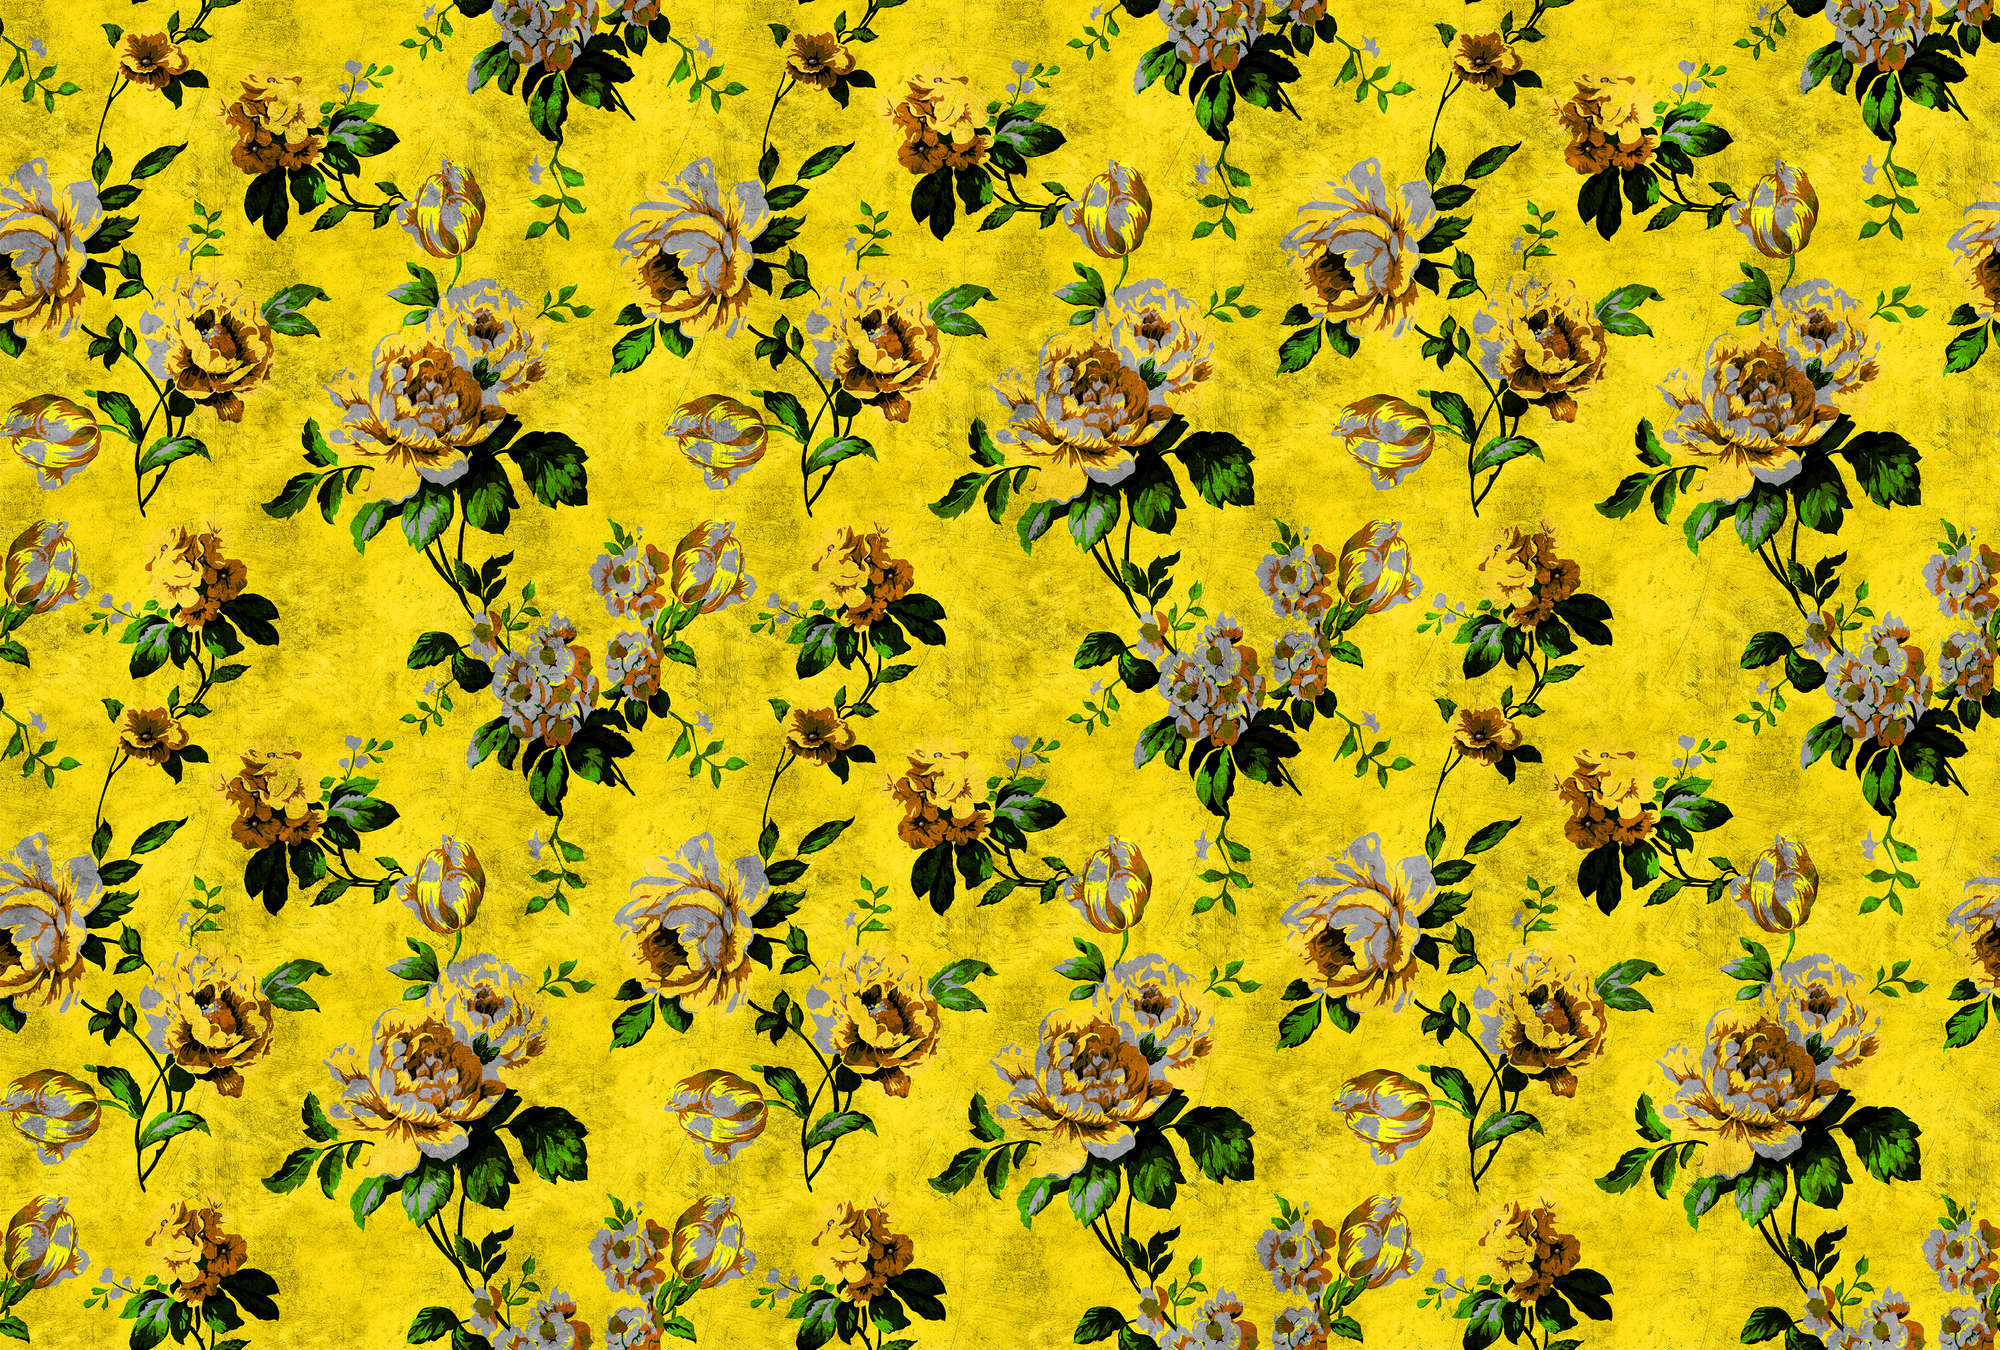             Wild roses 5 - Roses photo wallpaper in scratchy structure in retro look, Yellow - Yellow, Green | Matt smooth fleece
        